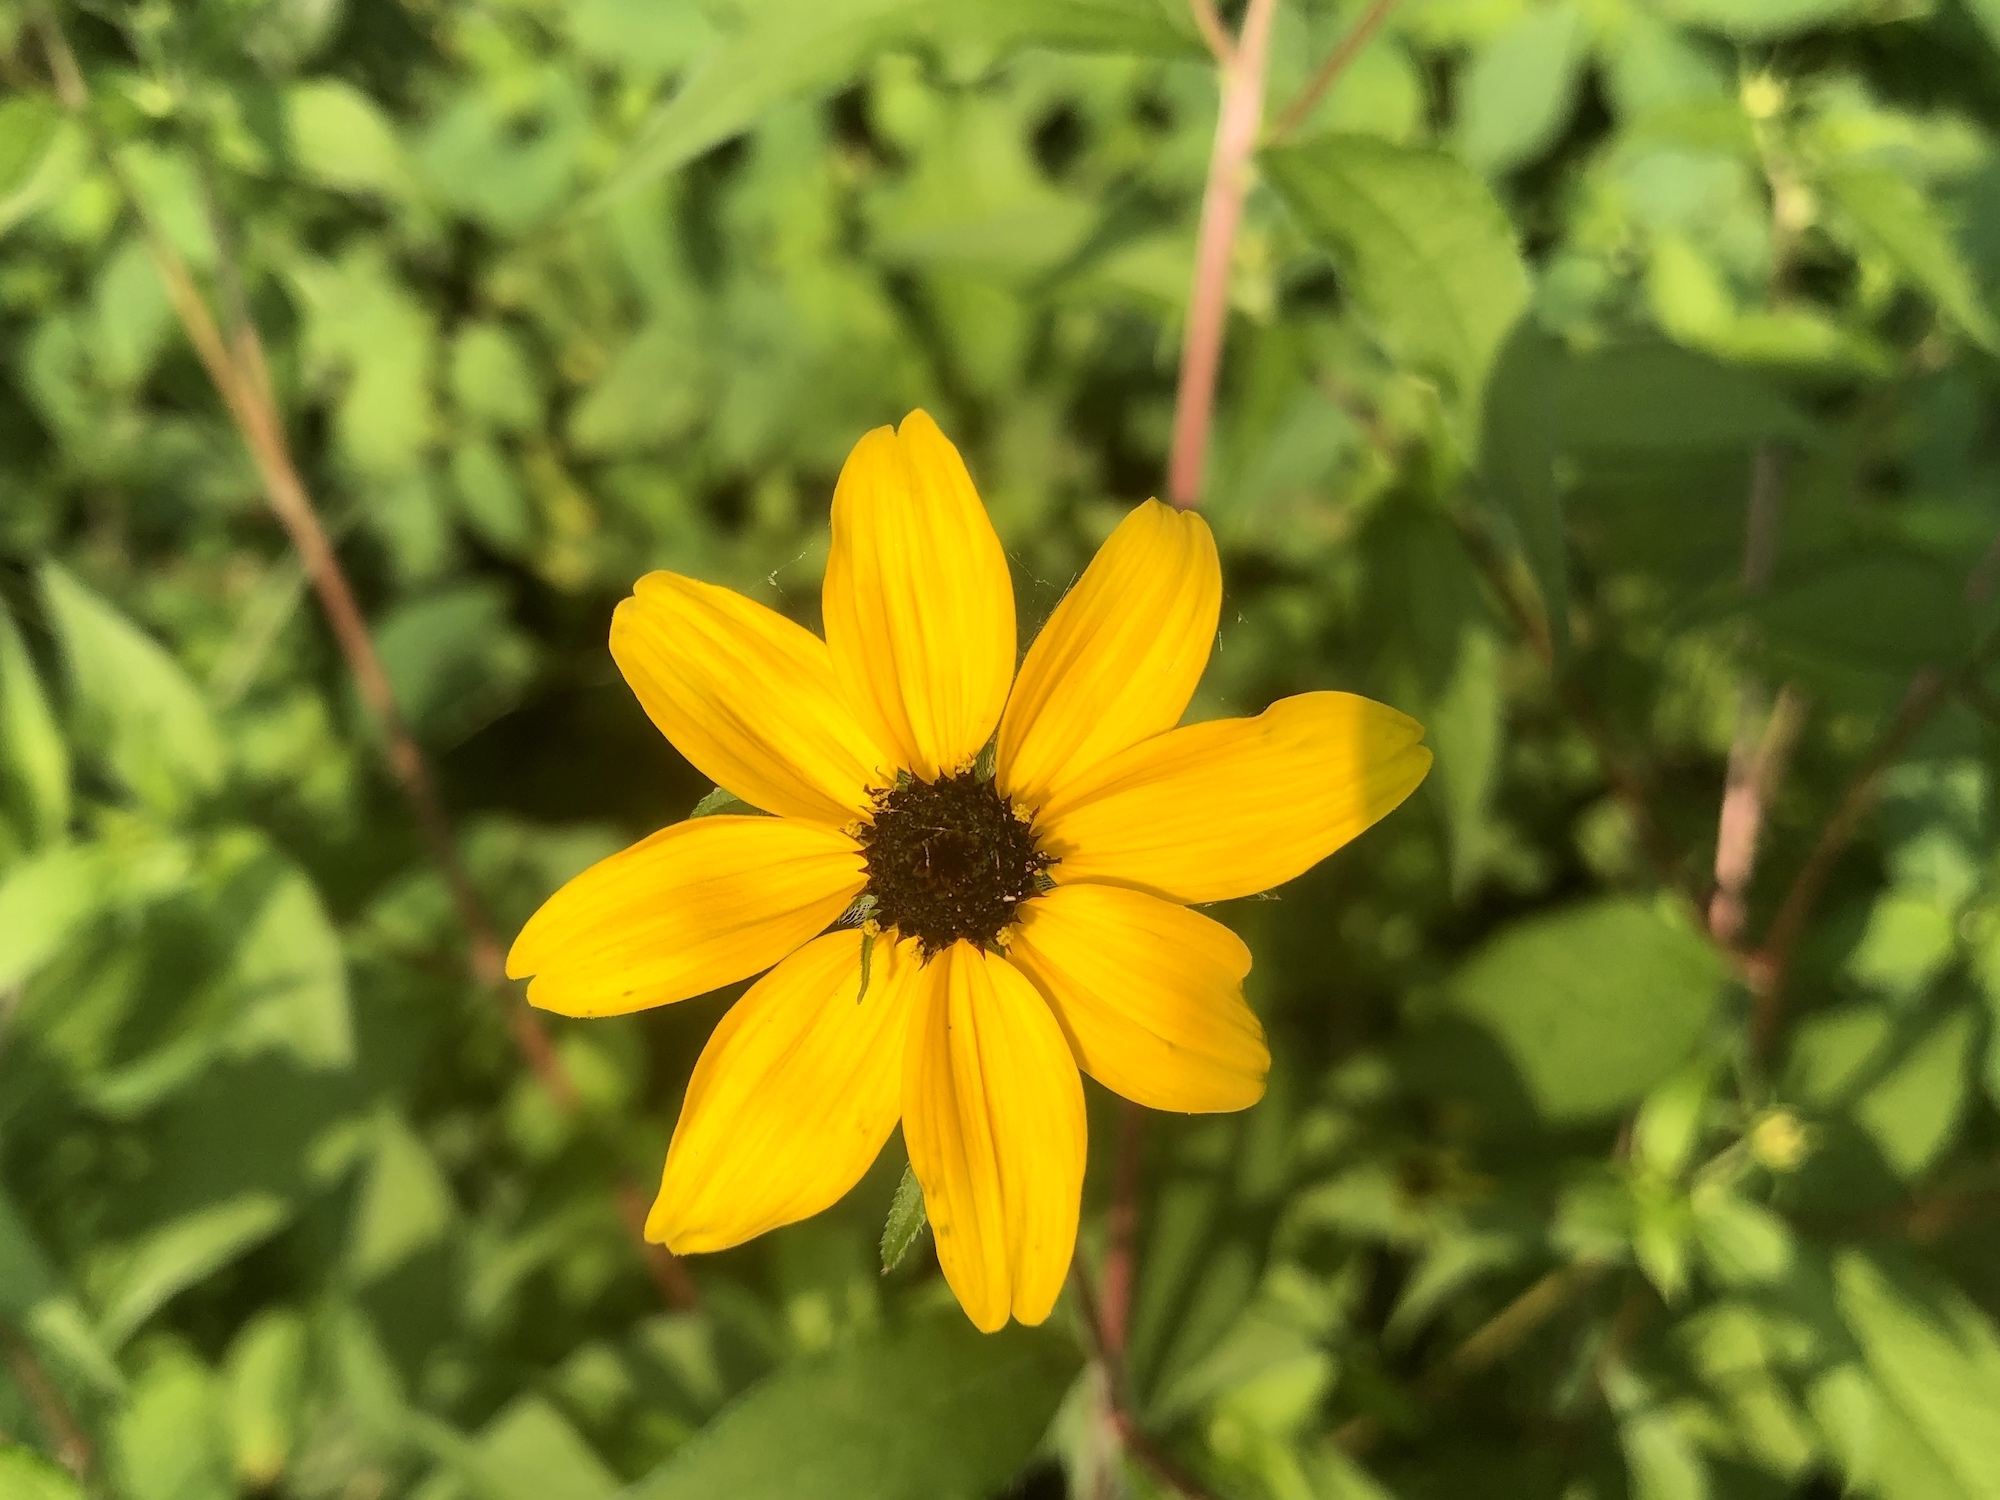 Brown-eyed Susan on banks of retaining pond in Madison, Wisconsin on July 24, 2019.